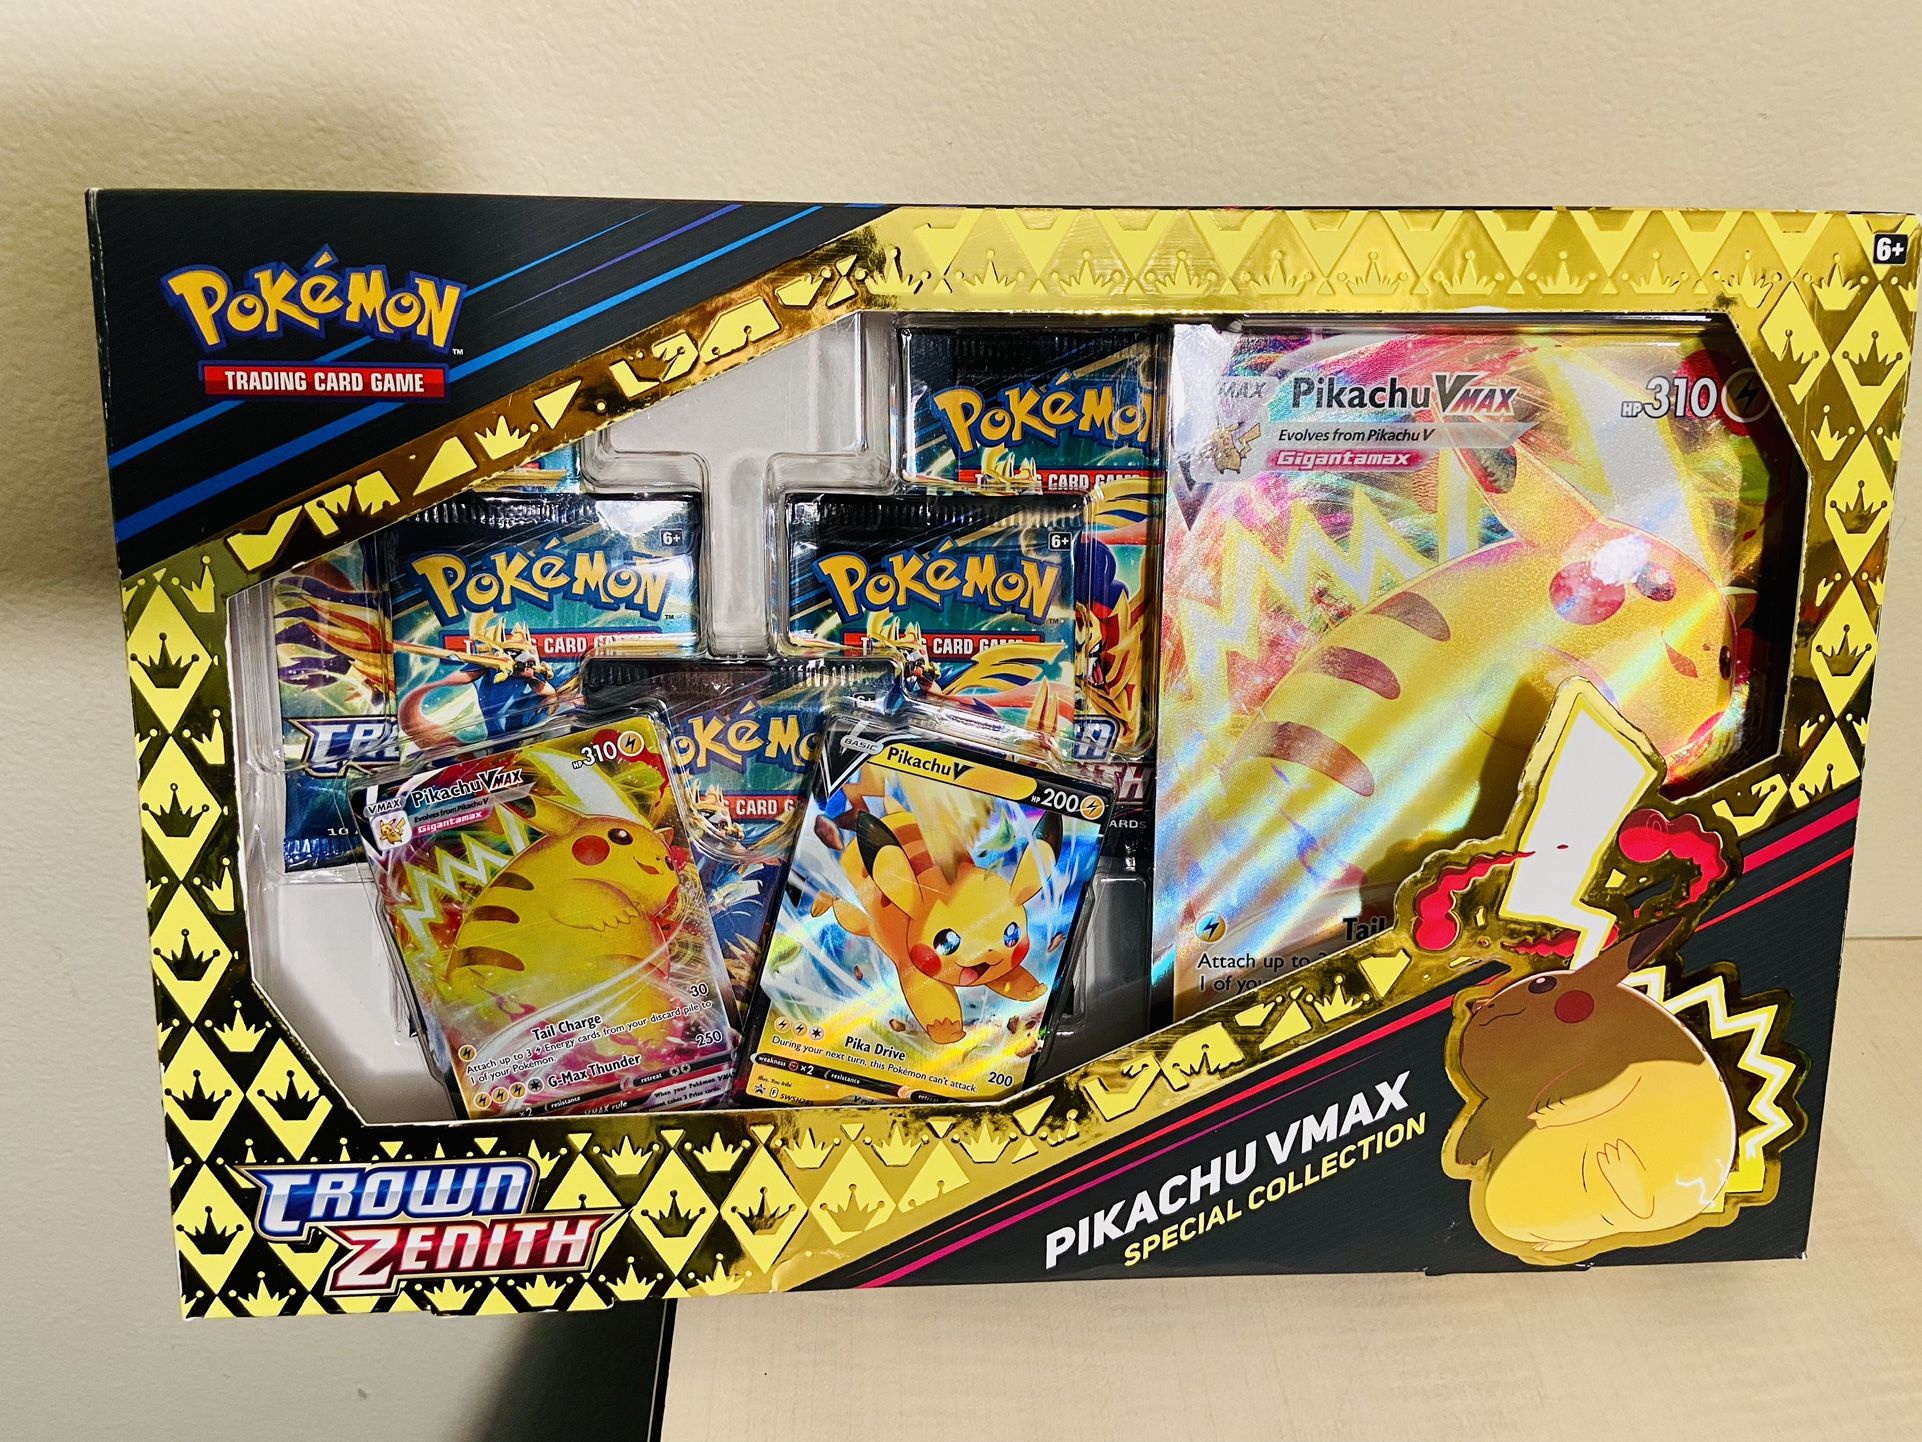 Pokemon Cards: Crown Zenith Pikachu VMAX Special Collection